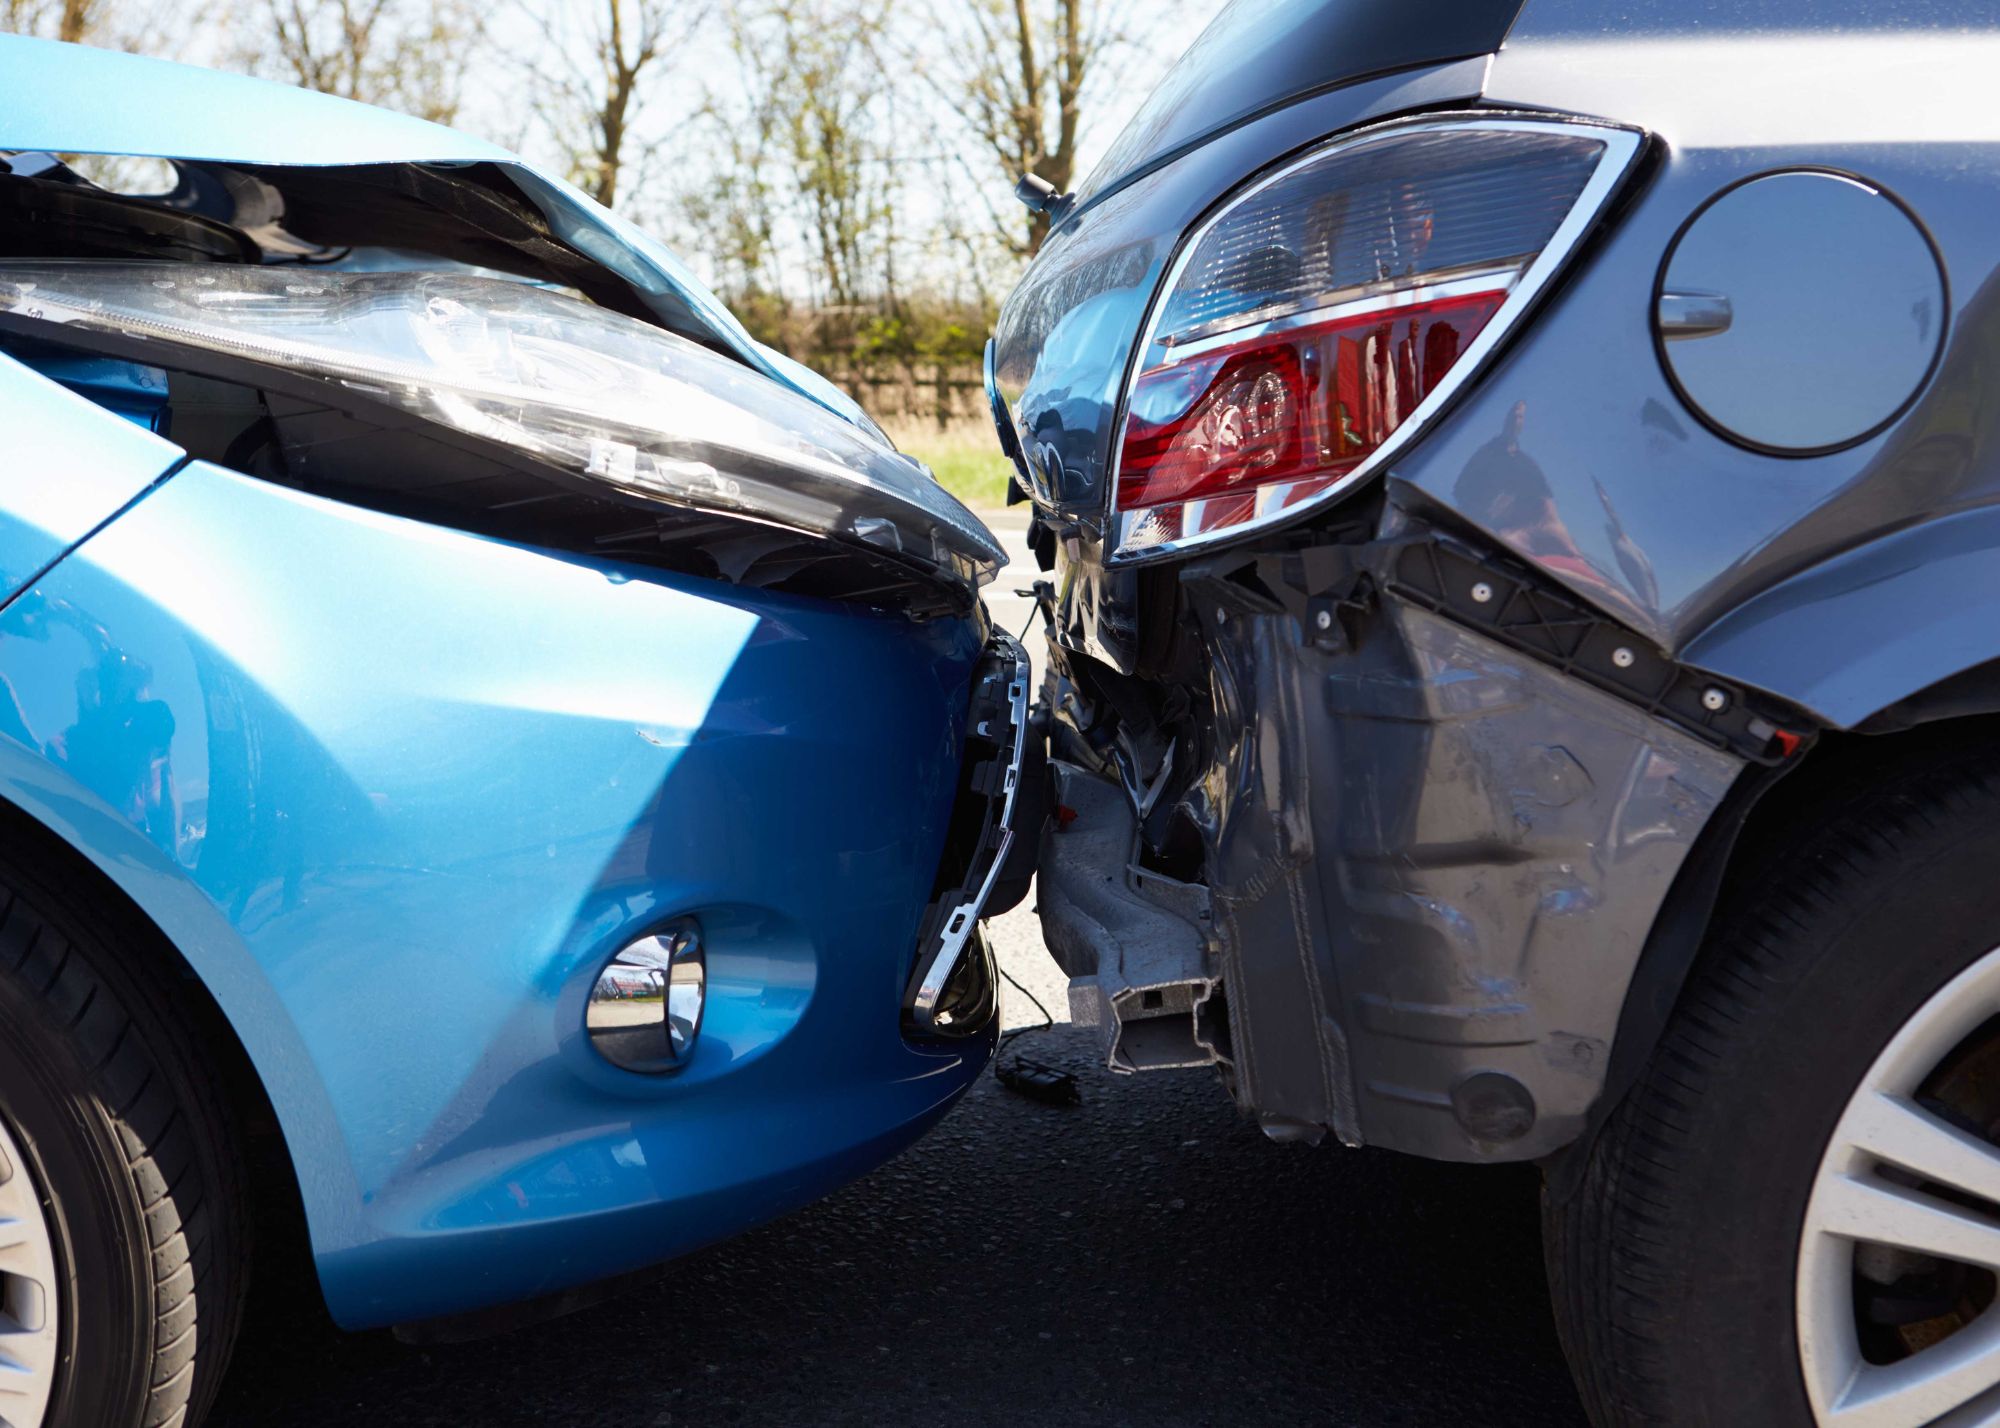 Understanding just what is SR22 Car Accident Insurance options for Denver residents